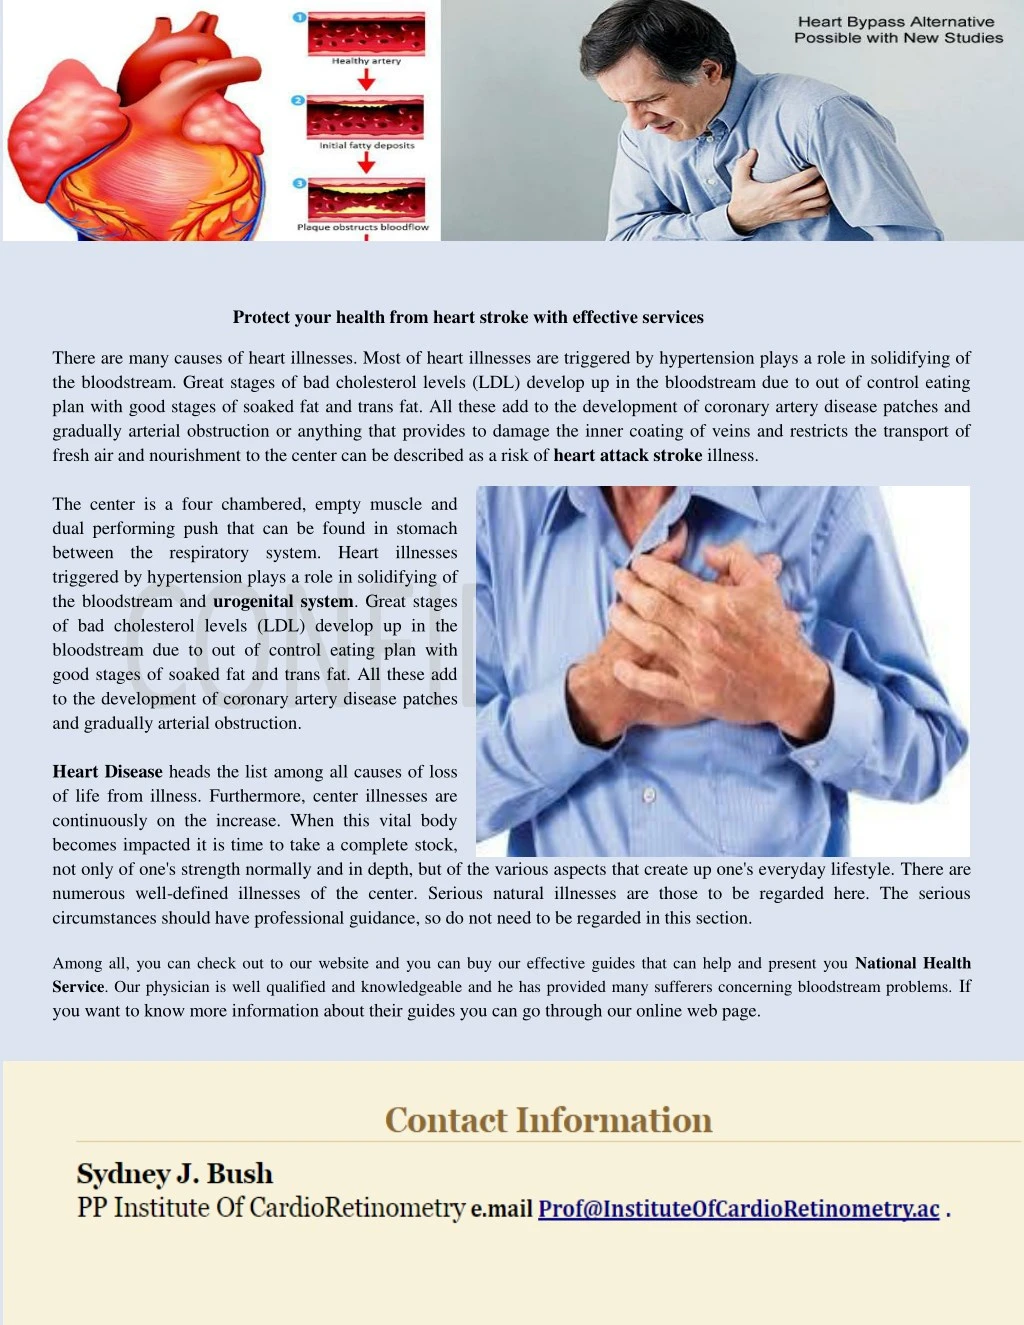 protect your health from heart stroke with